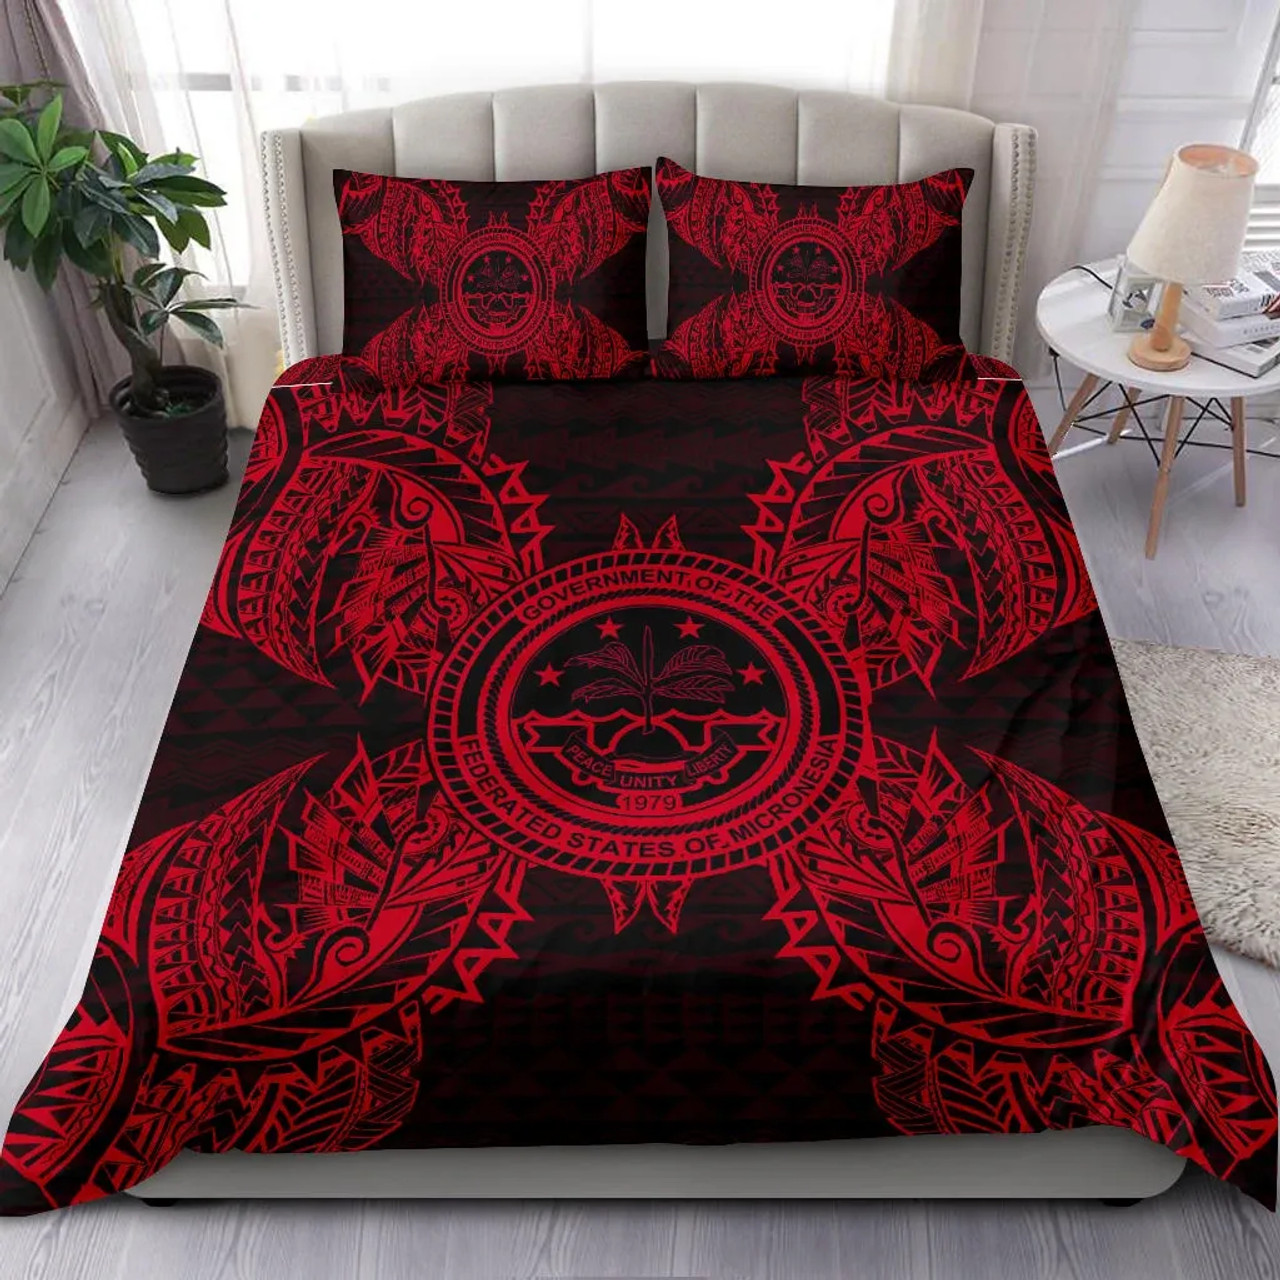 Polynesian Bedding Set - Federated States Of Micronesian Duvet Cover Set Map Red 1